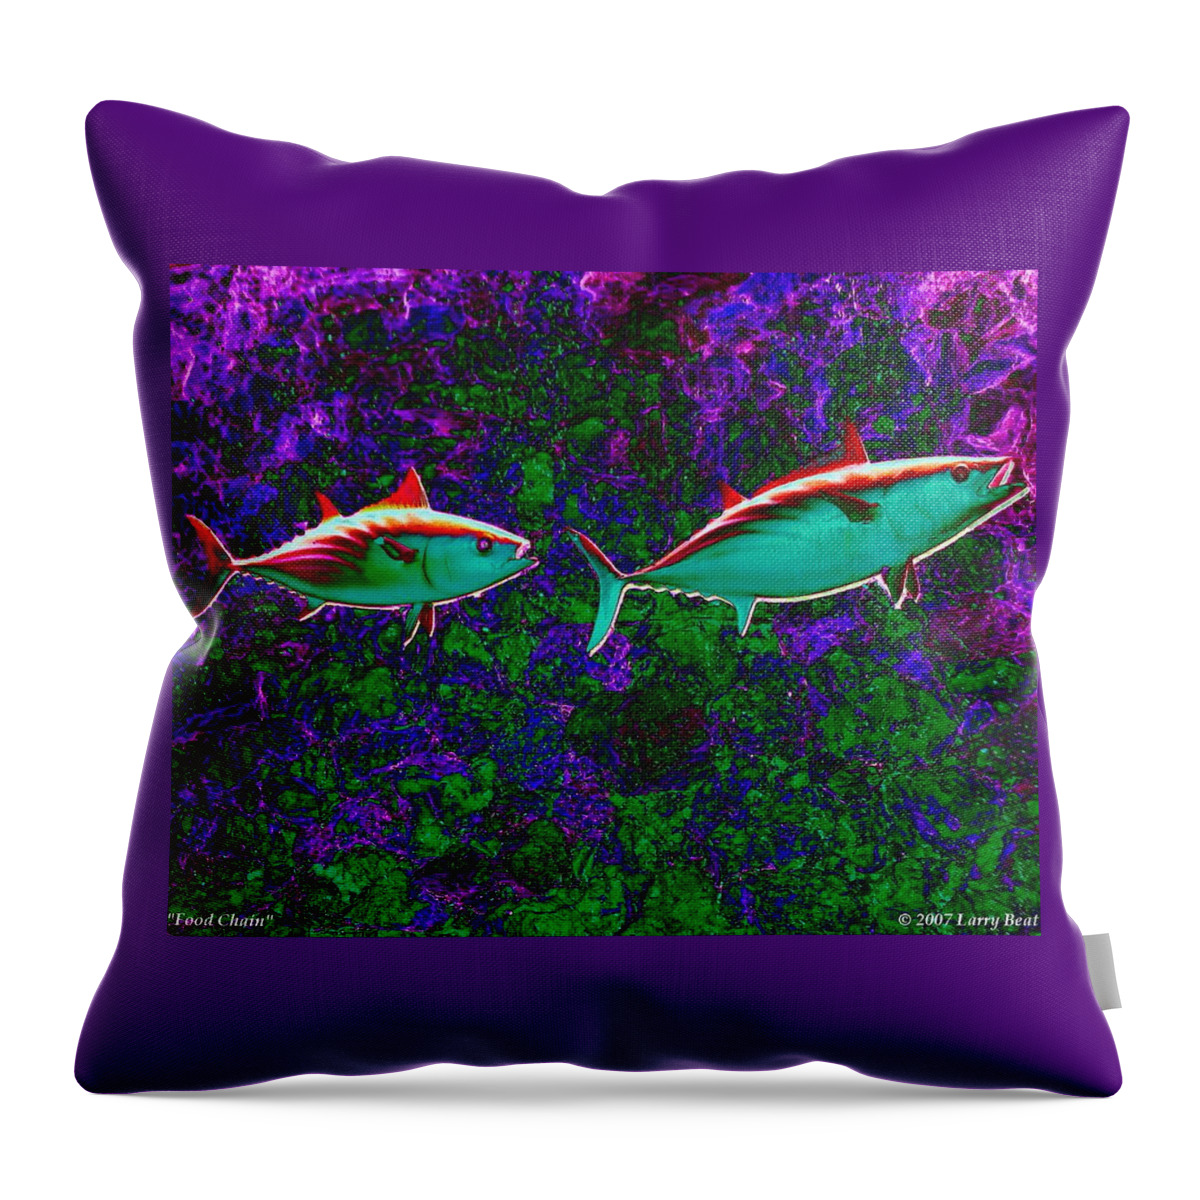 Fish Throw Pillow featuring the digital art Food Chain by Larry Beat